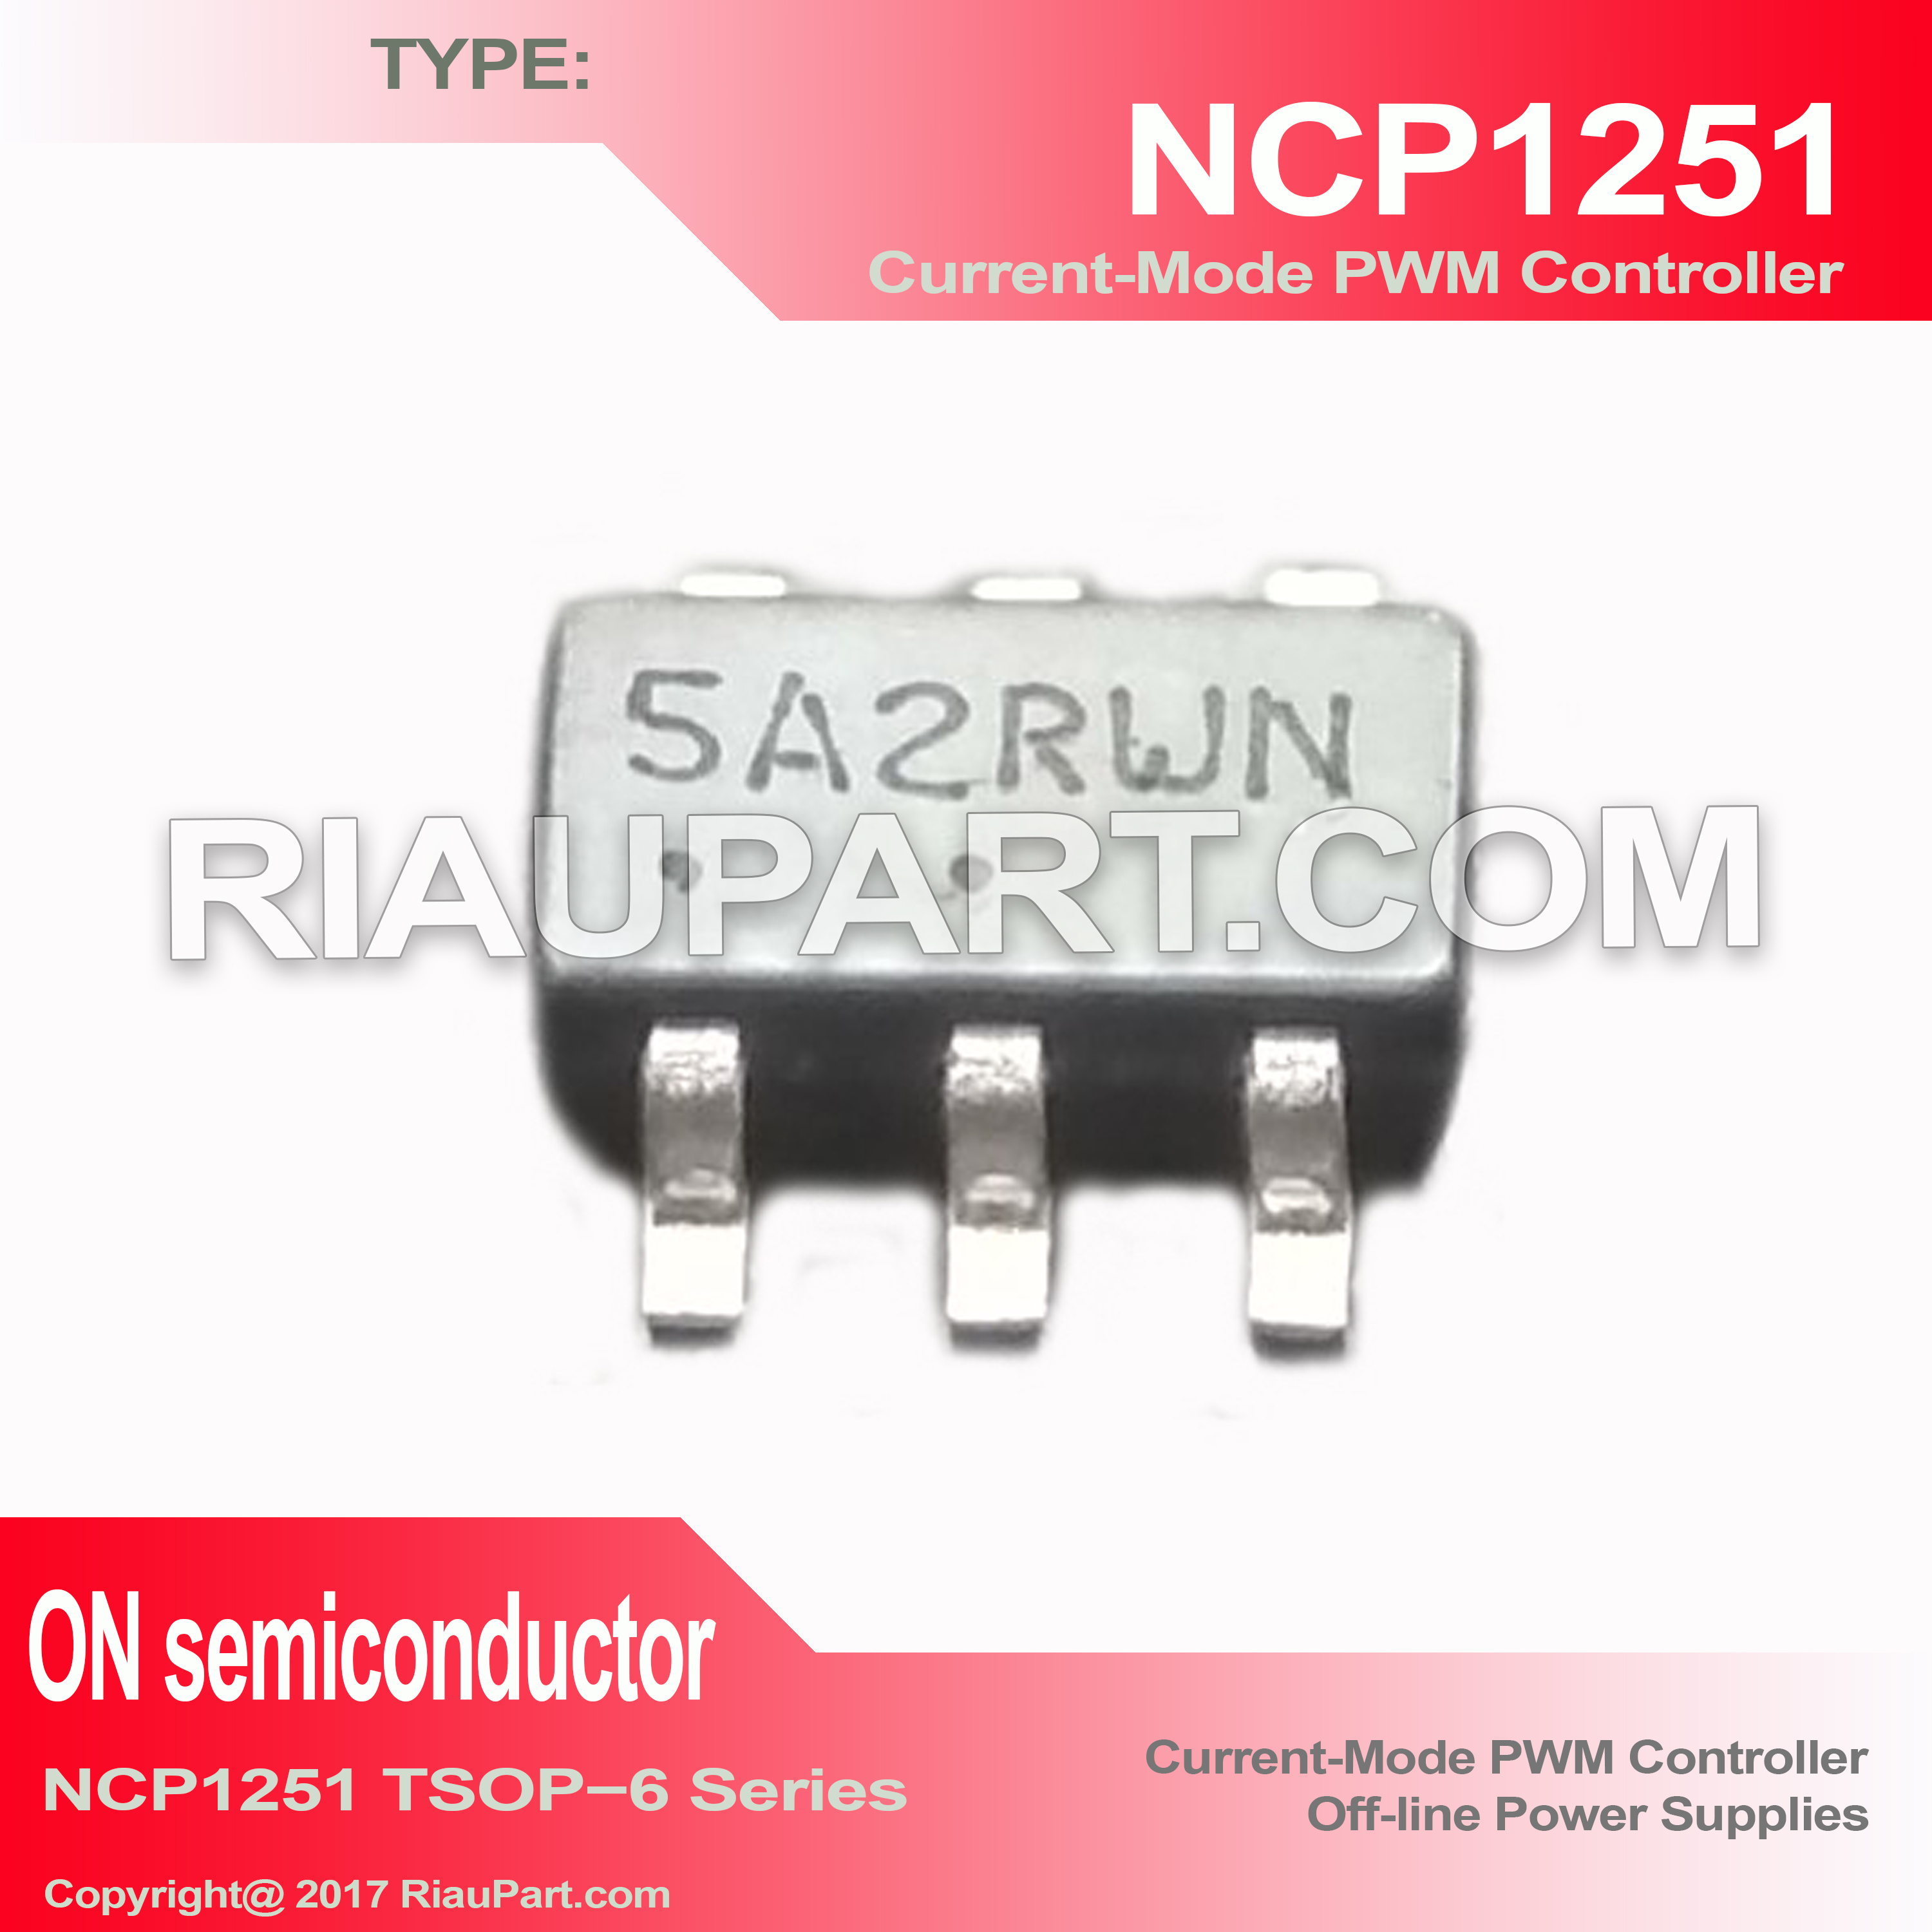 IC SMD CONTROLLER NCP1251A - NCP1251 - 1251 ORIGINAL